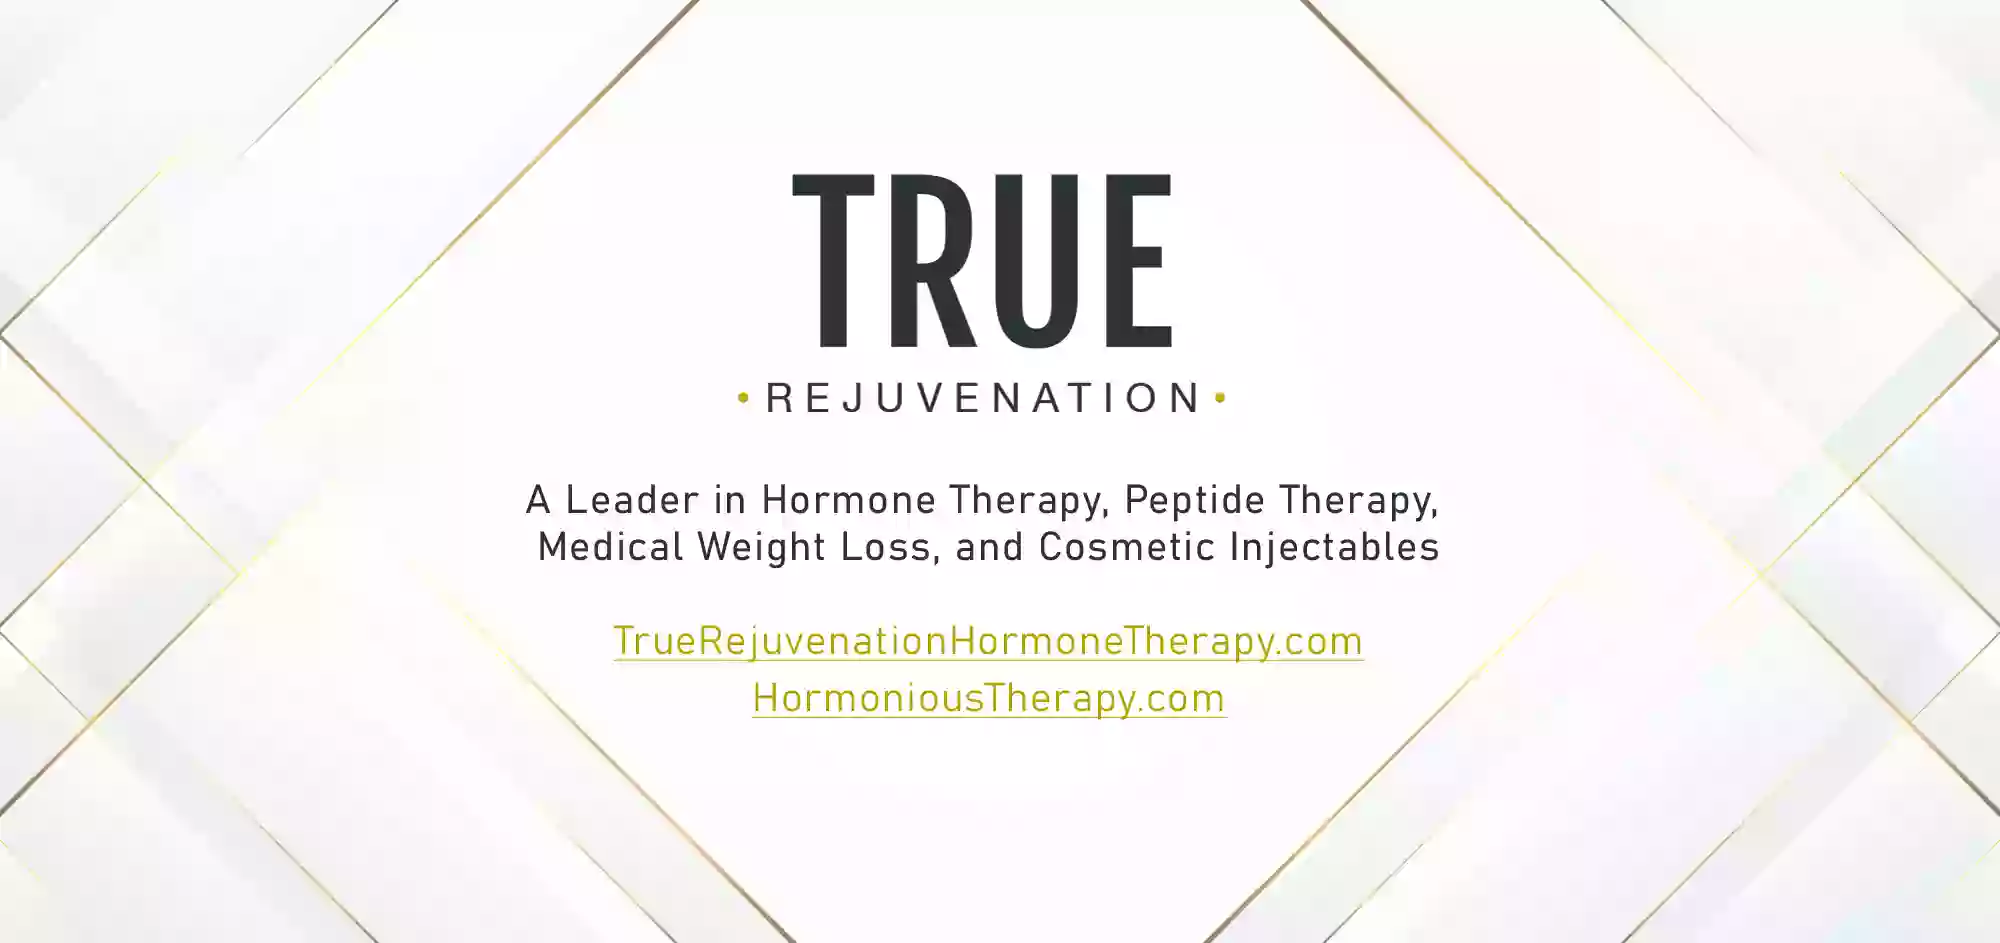 True Rejuvenation Peptide and Hormone Replacement Therapy